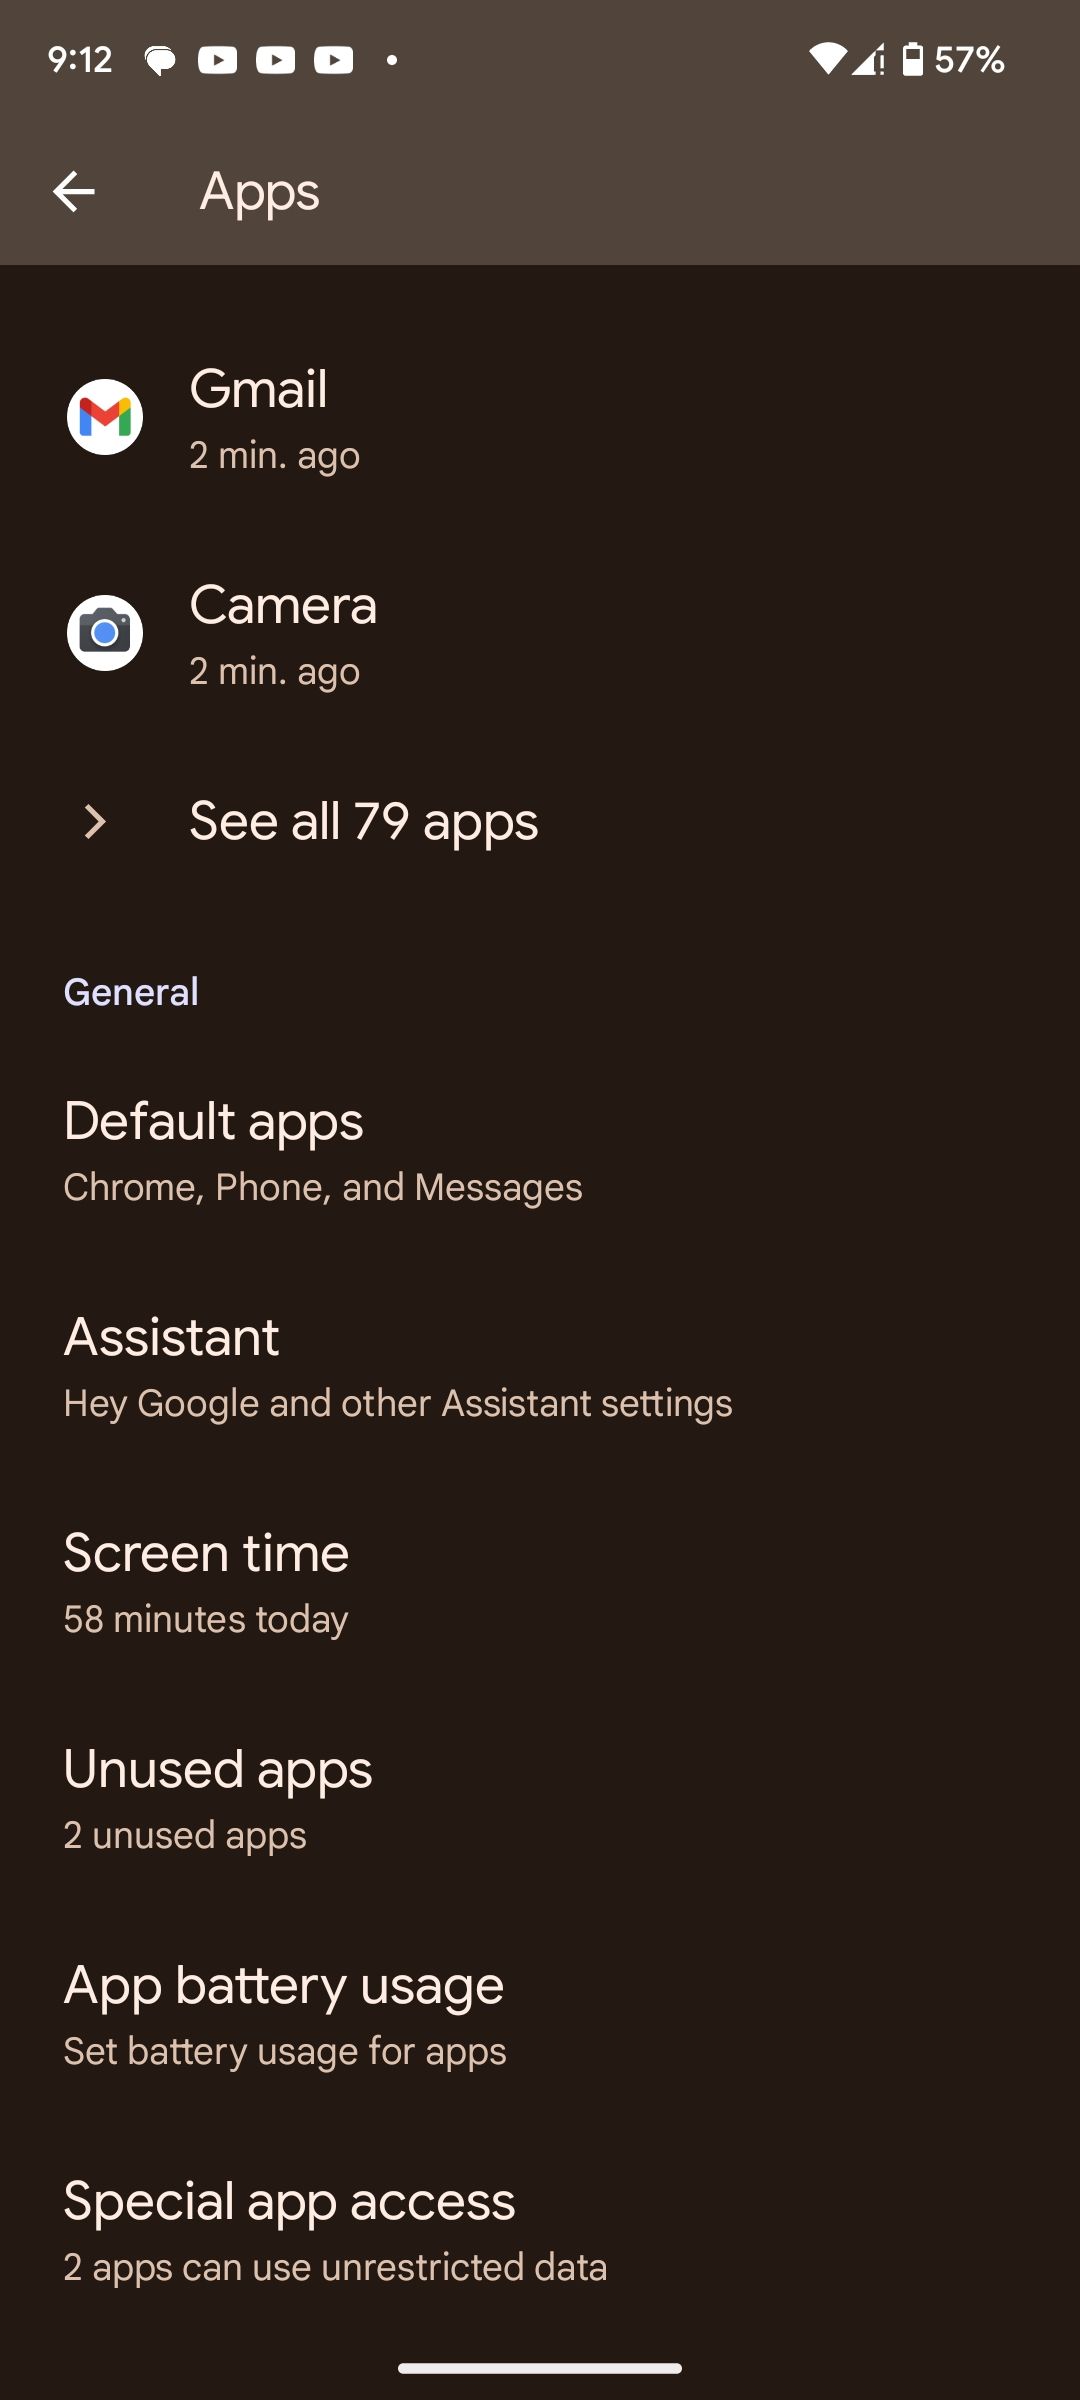 App settings page on Android